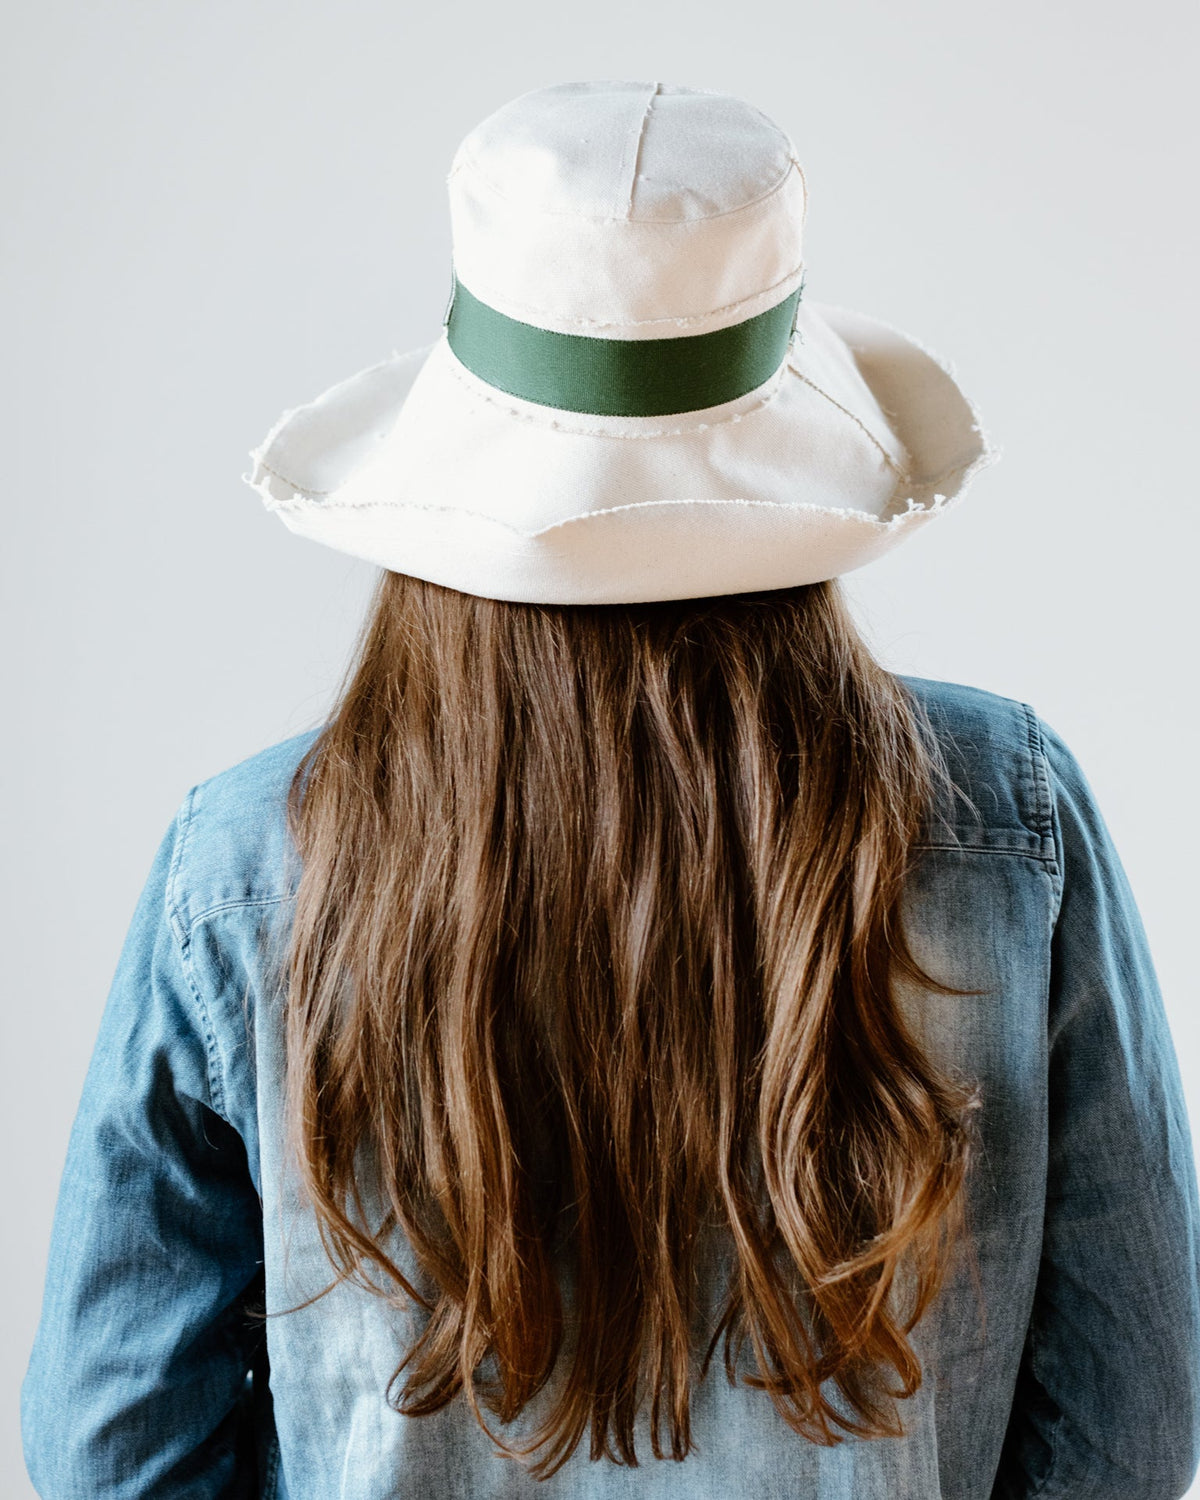 Explore our collection to find Dia in Cream/Grass Lola Hats